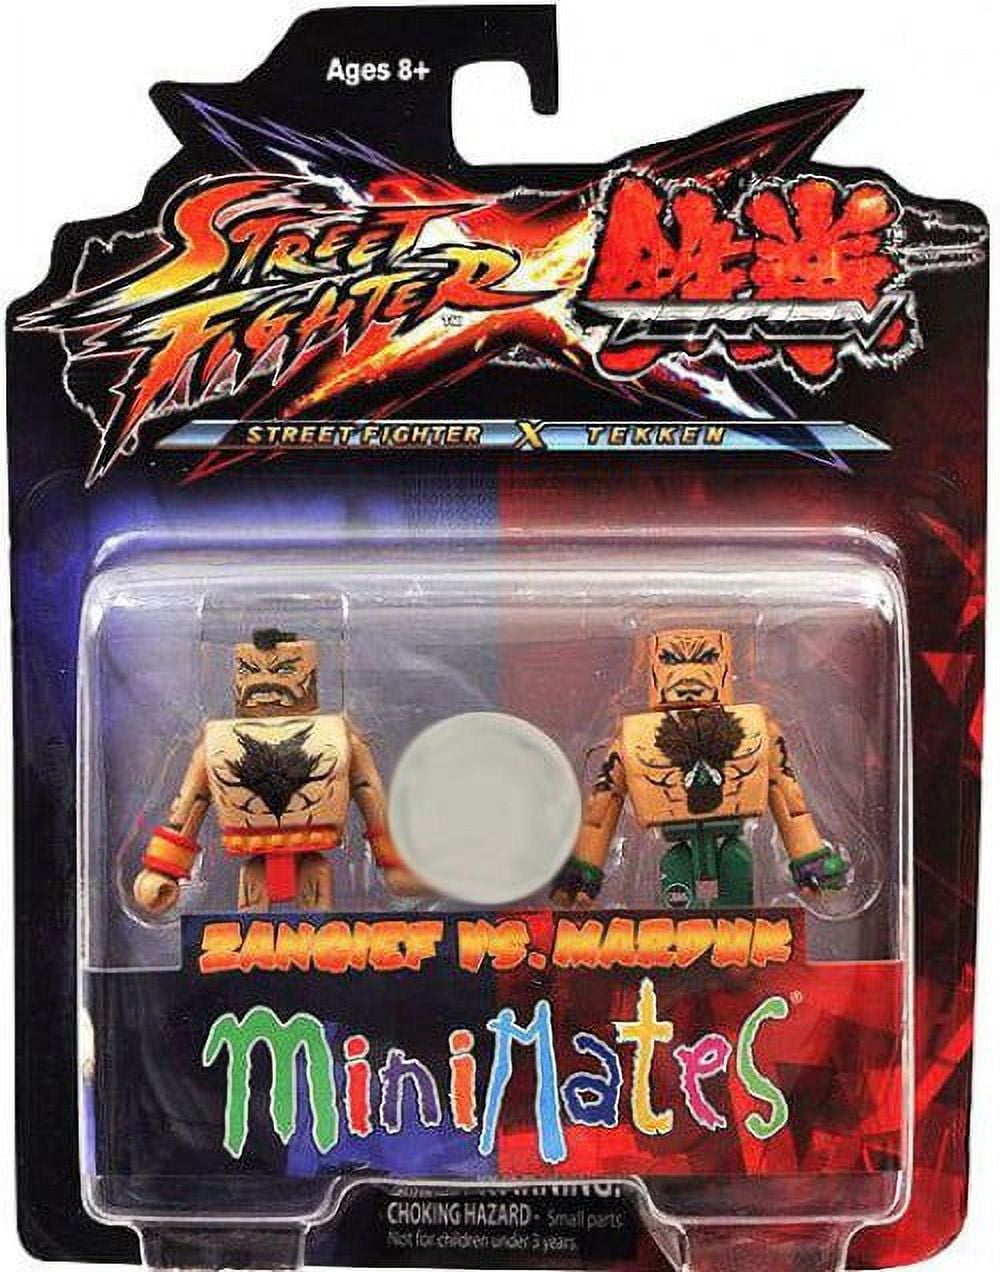  Street Fighter Pieces Zangief 14 Statue Figure : Toys & Games